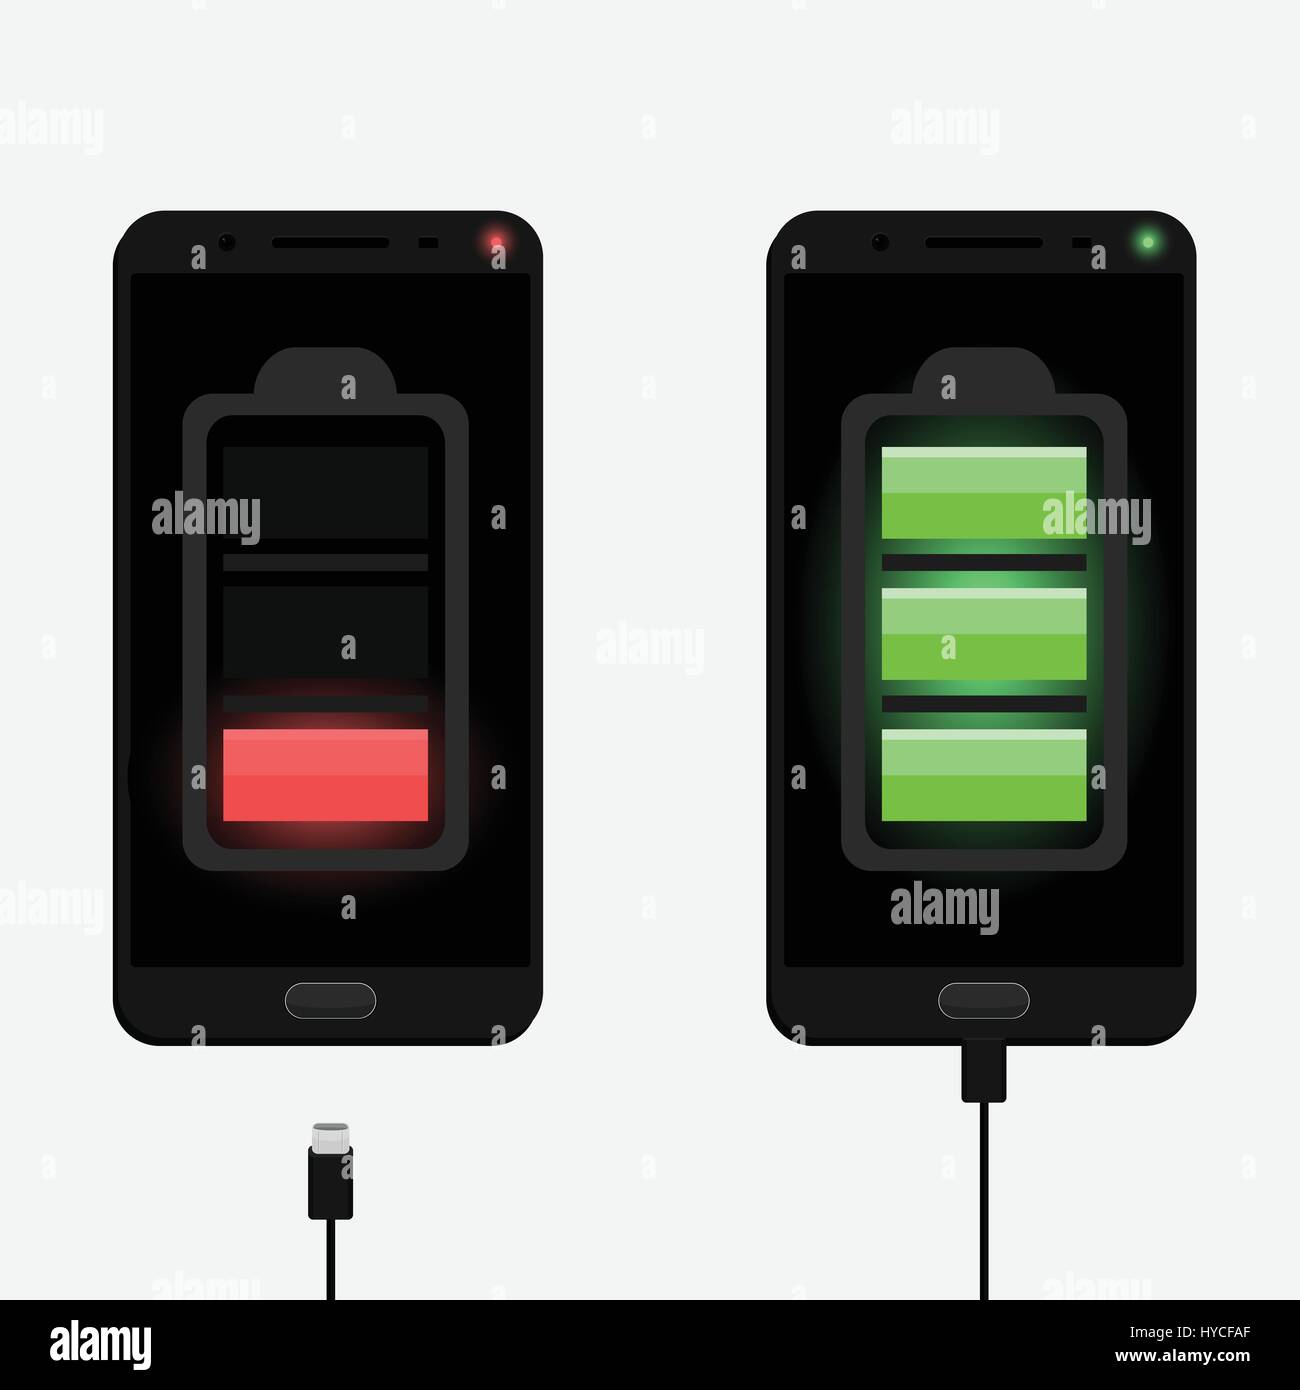 Mockup of two black smartphones charging with micro usb cables. One phone with no battery and another with fully charged battery. Smartphones isolated Stock Vector